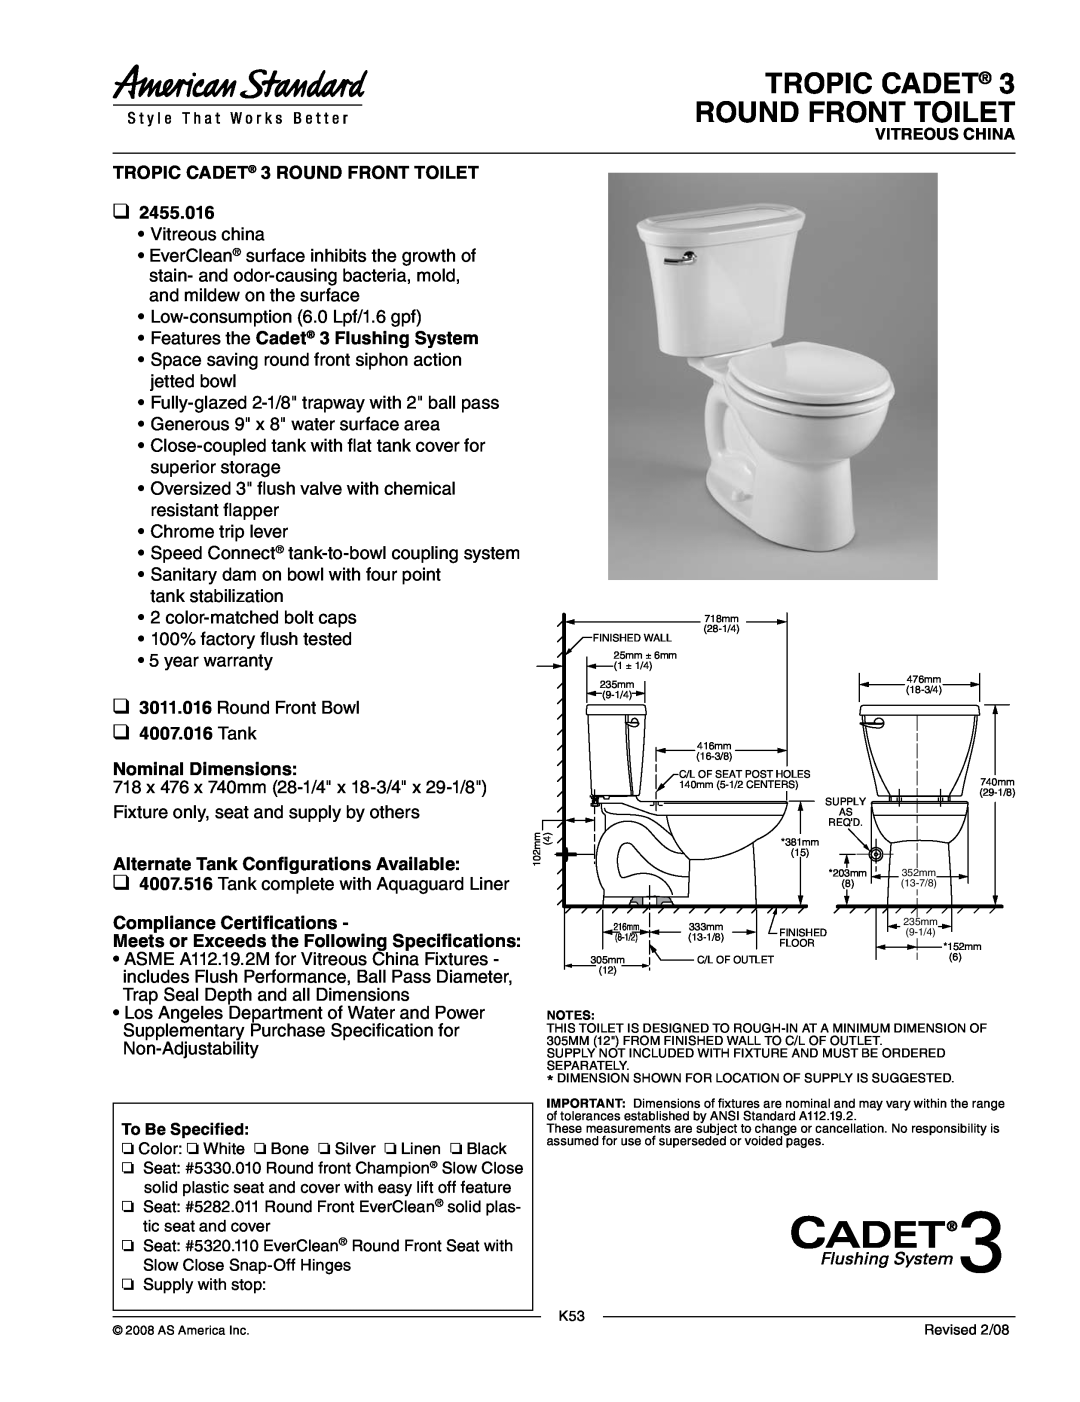 American Standard 3011.016 dimensions TROPIC CADET 3 ROUND FRONT TOILET, 2455.016, Features the Cadet 3 Flushing System 